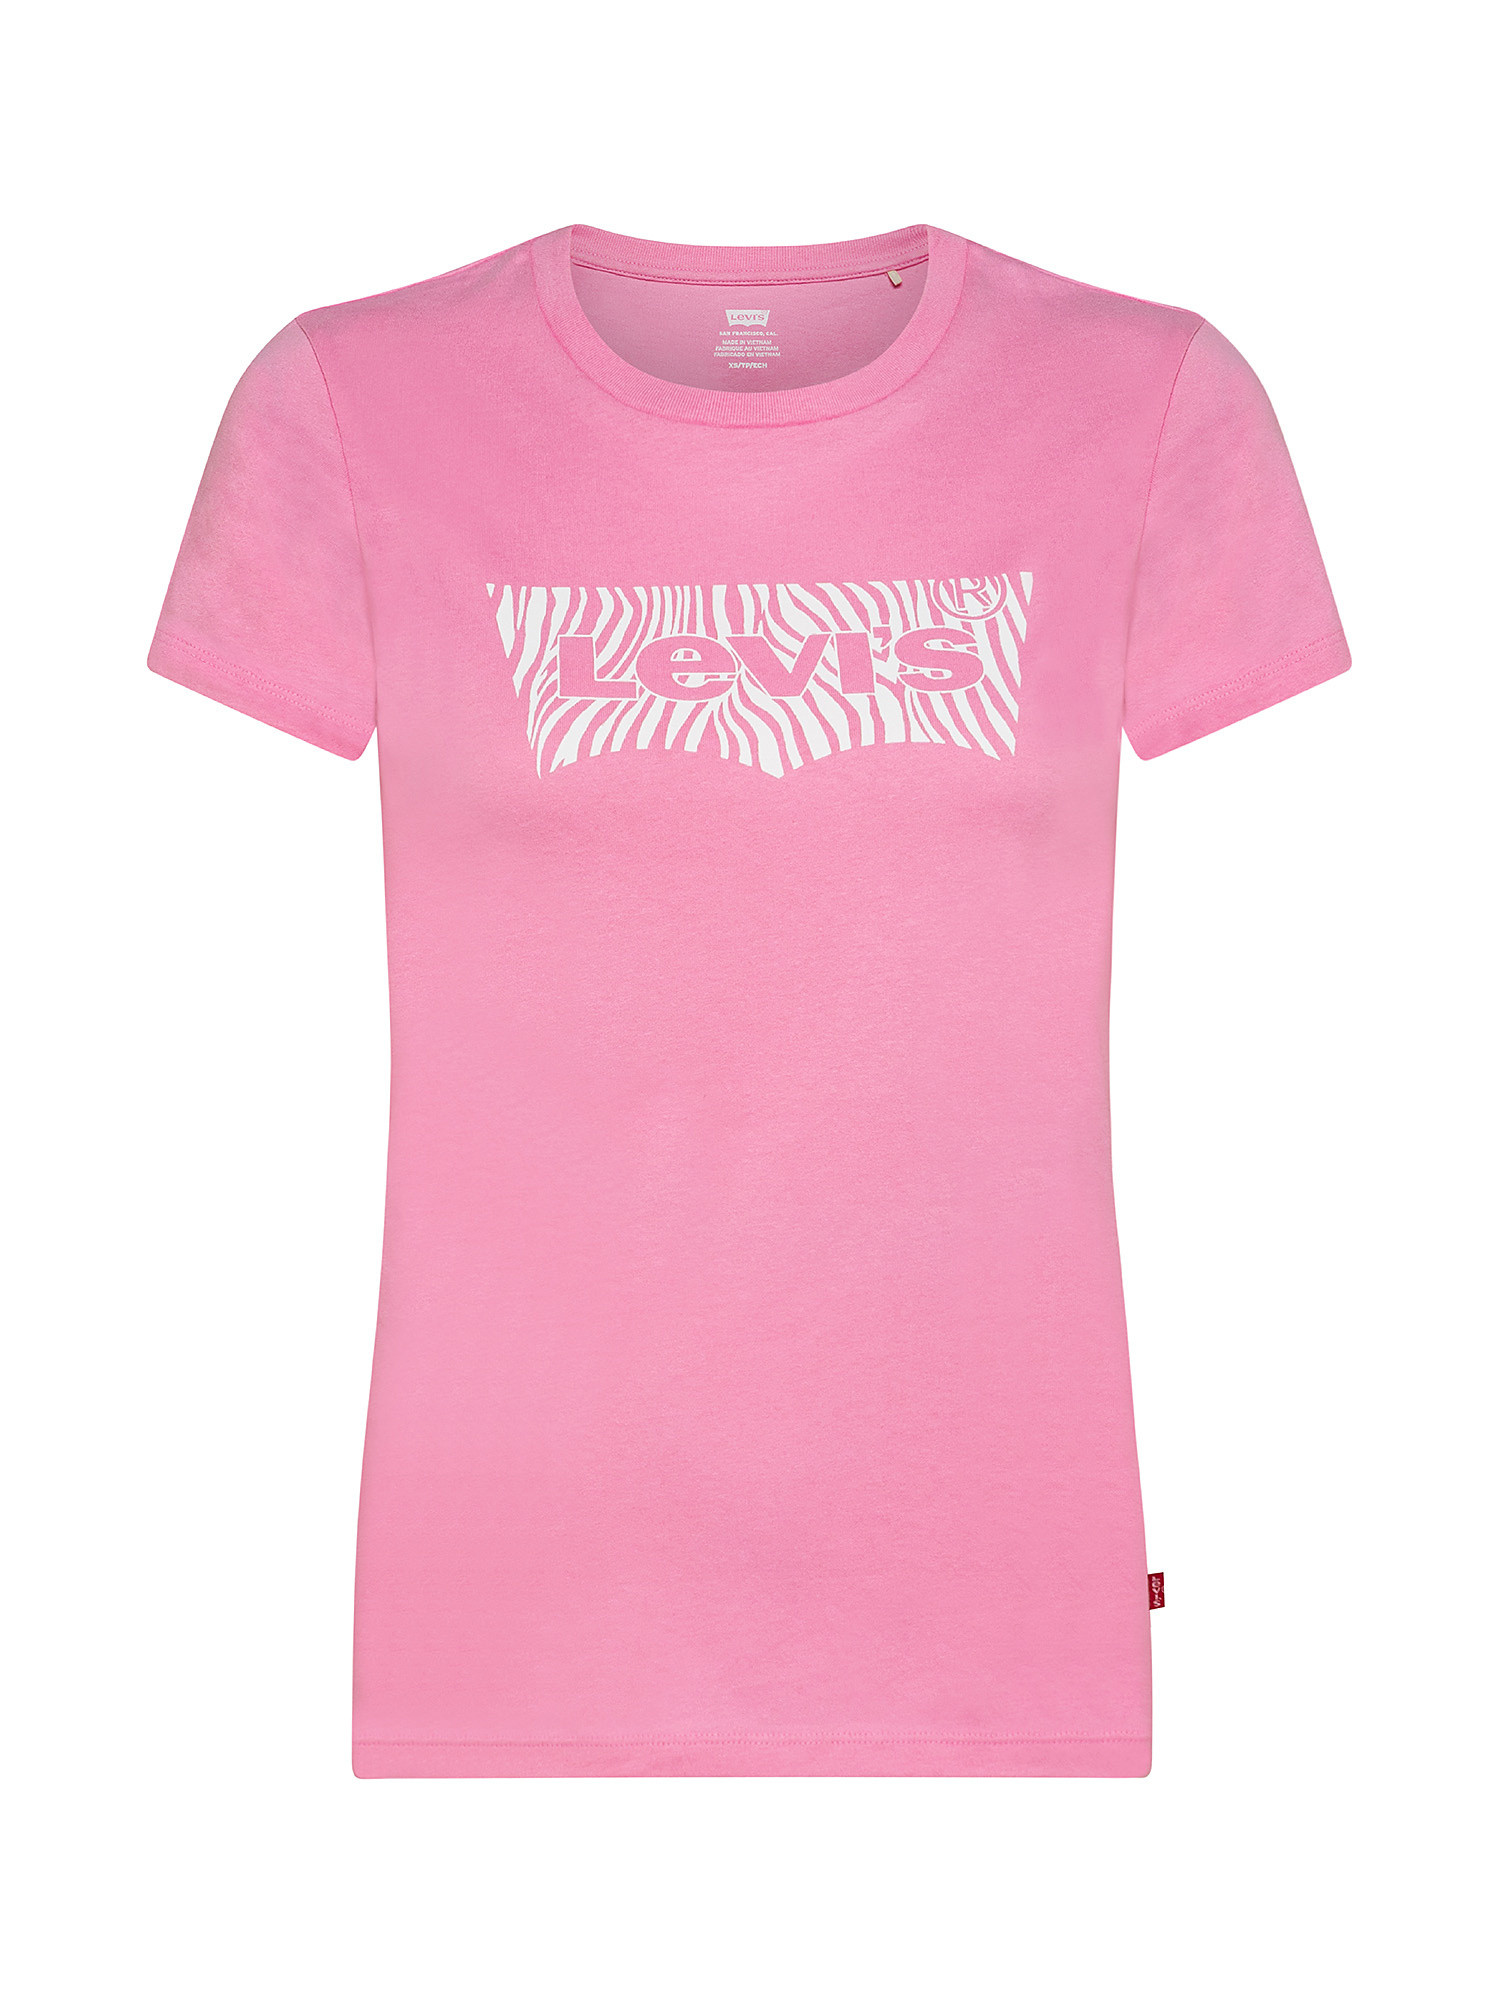 Perfect Tee T-shirt, Pink, large image number 0